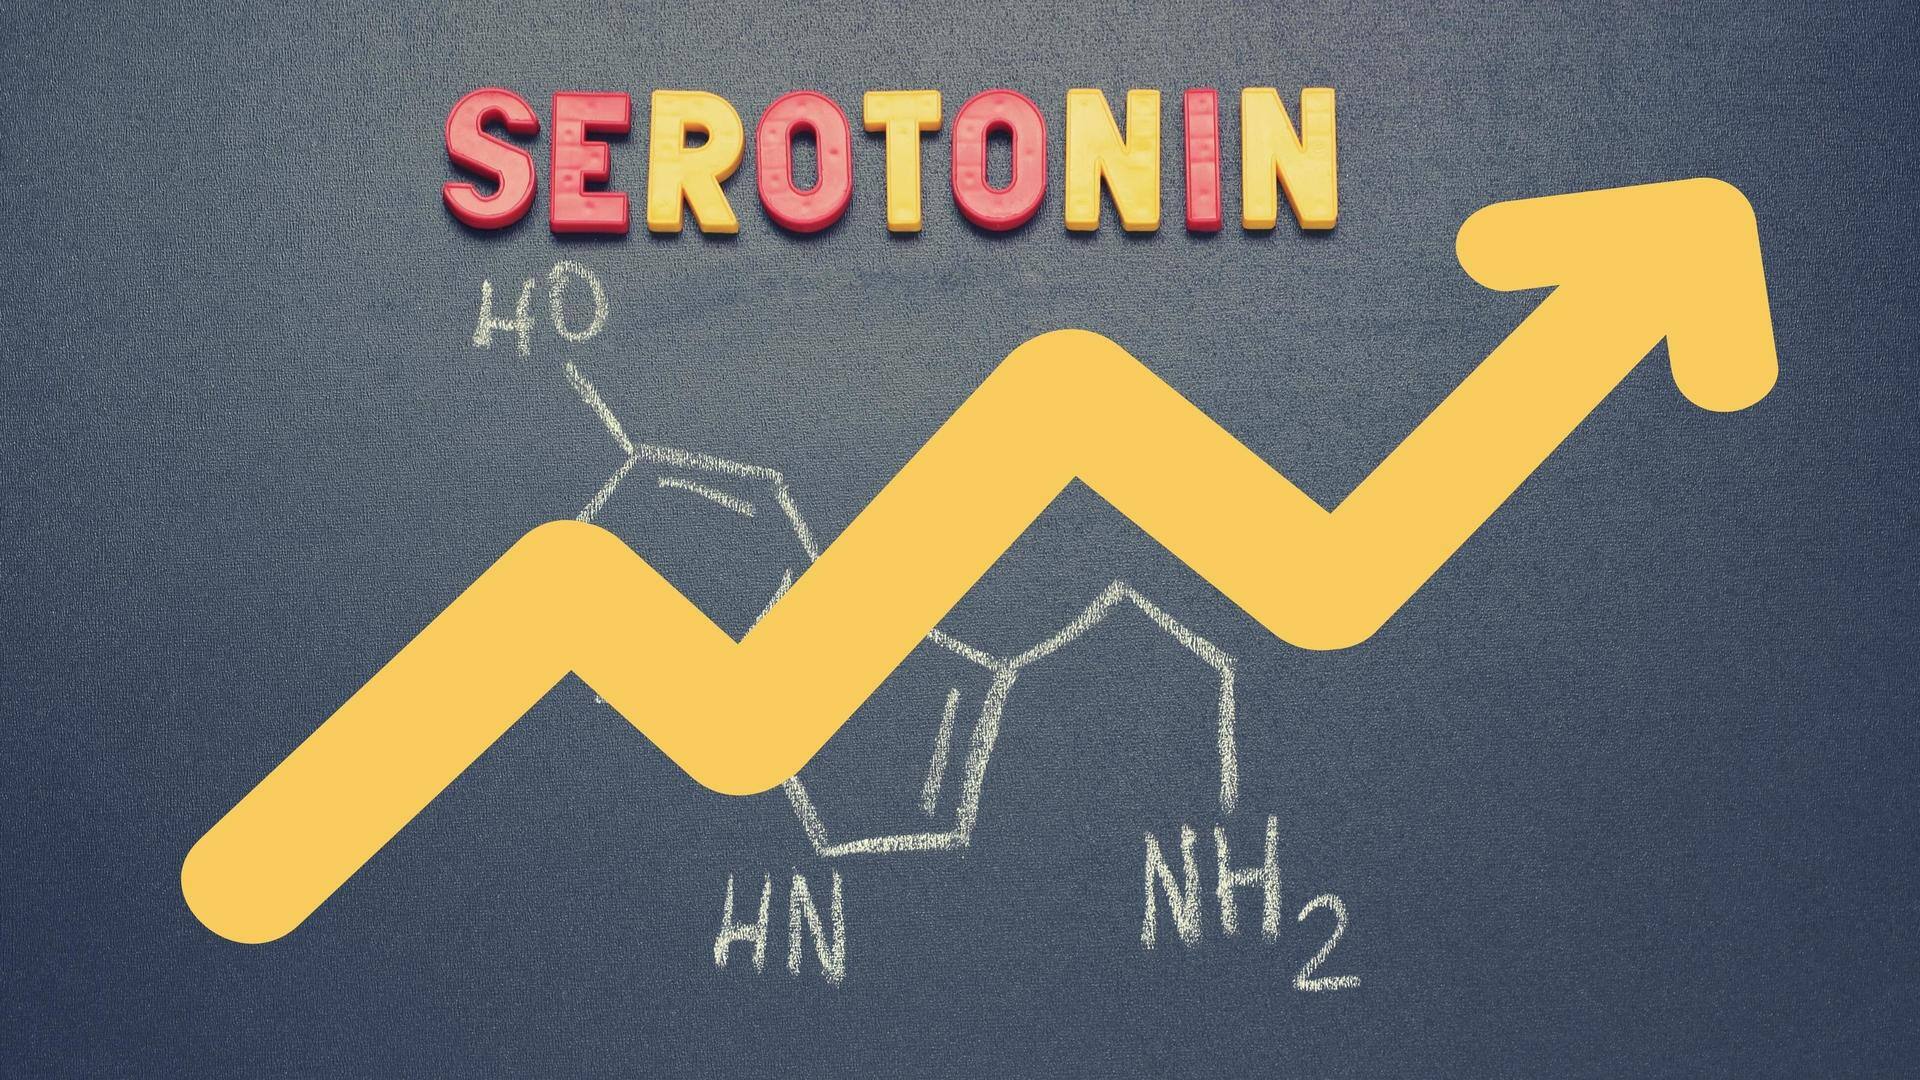 Here are 5 ways to increase your serotonin levels naturally